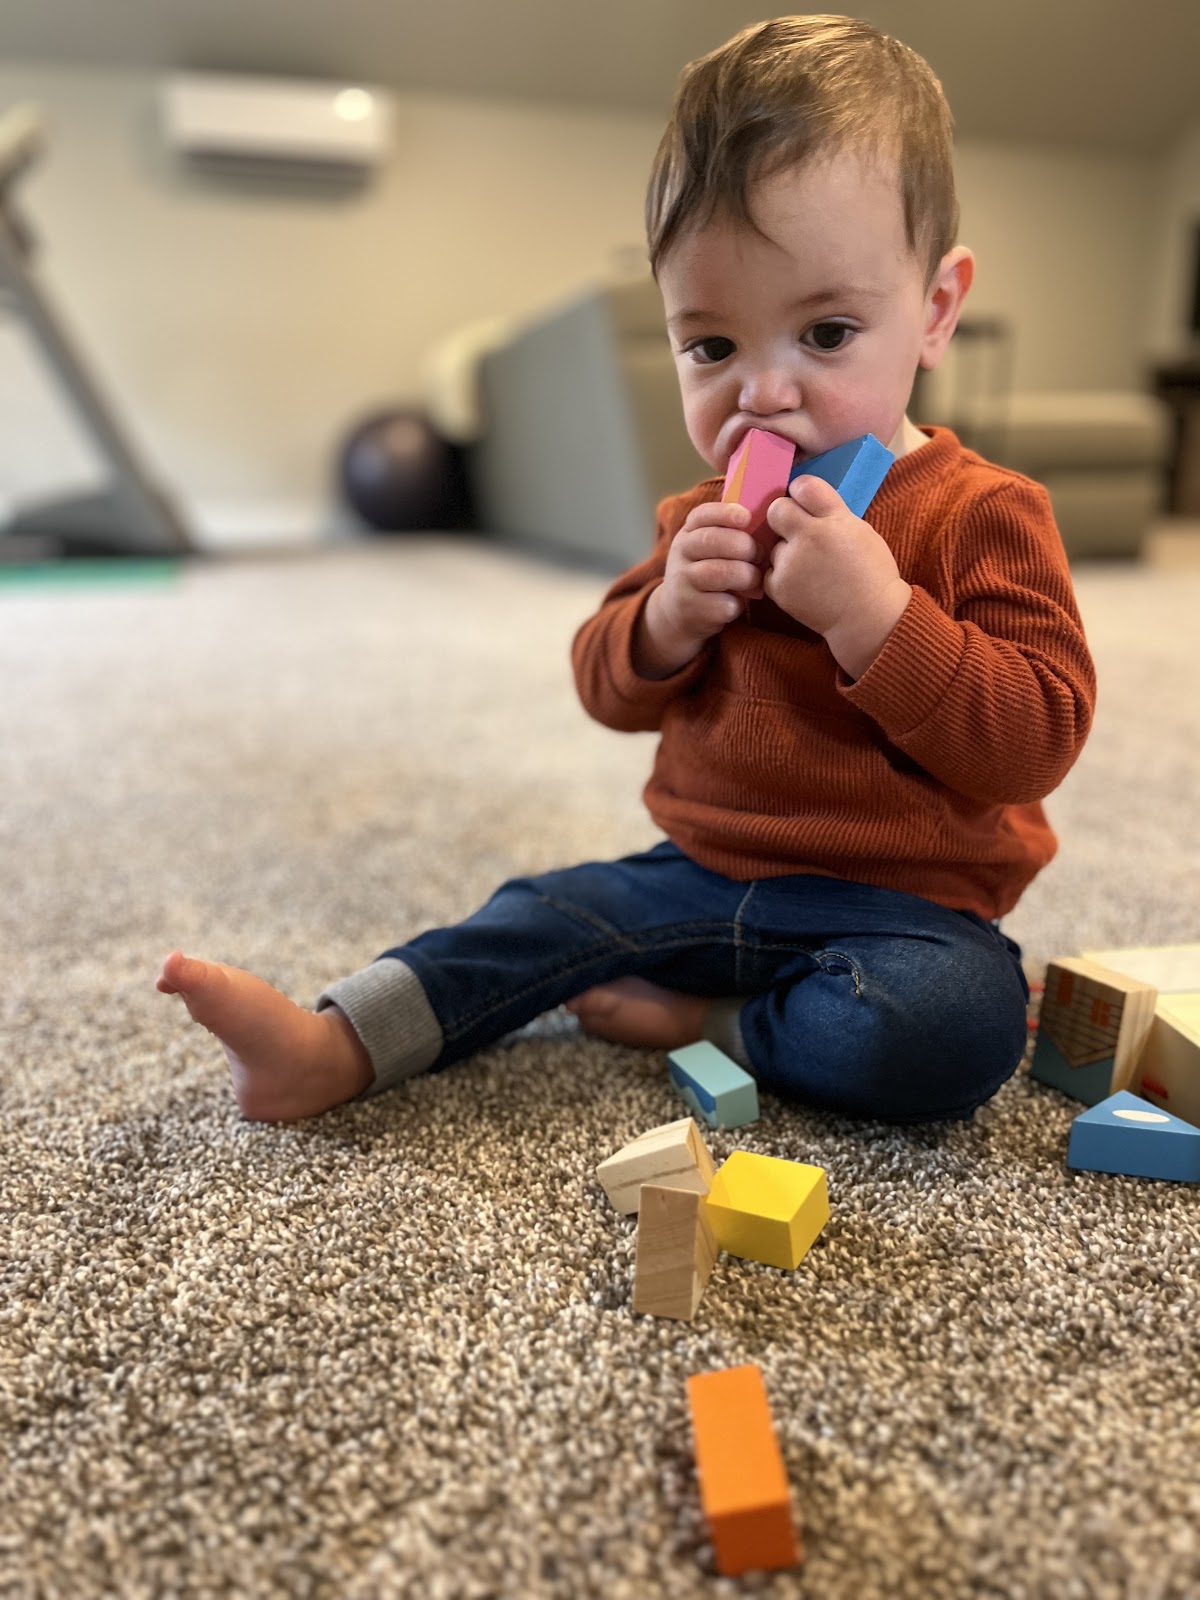 7-month-old toys